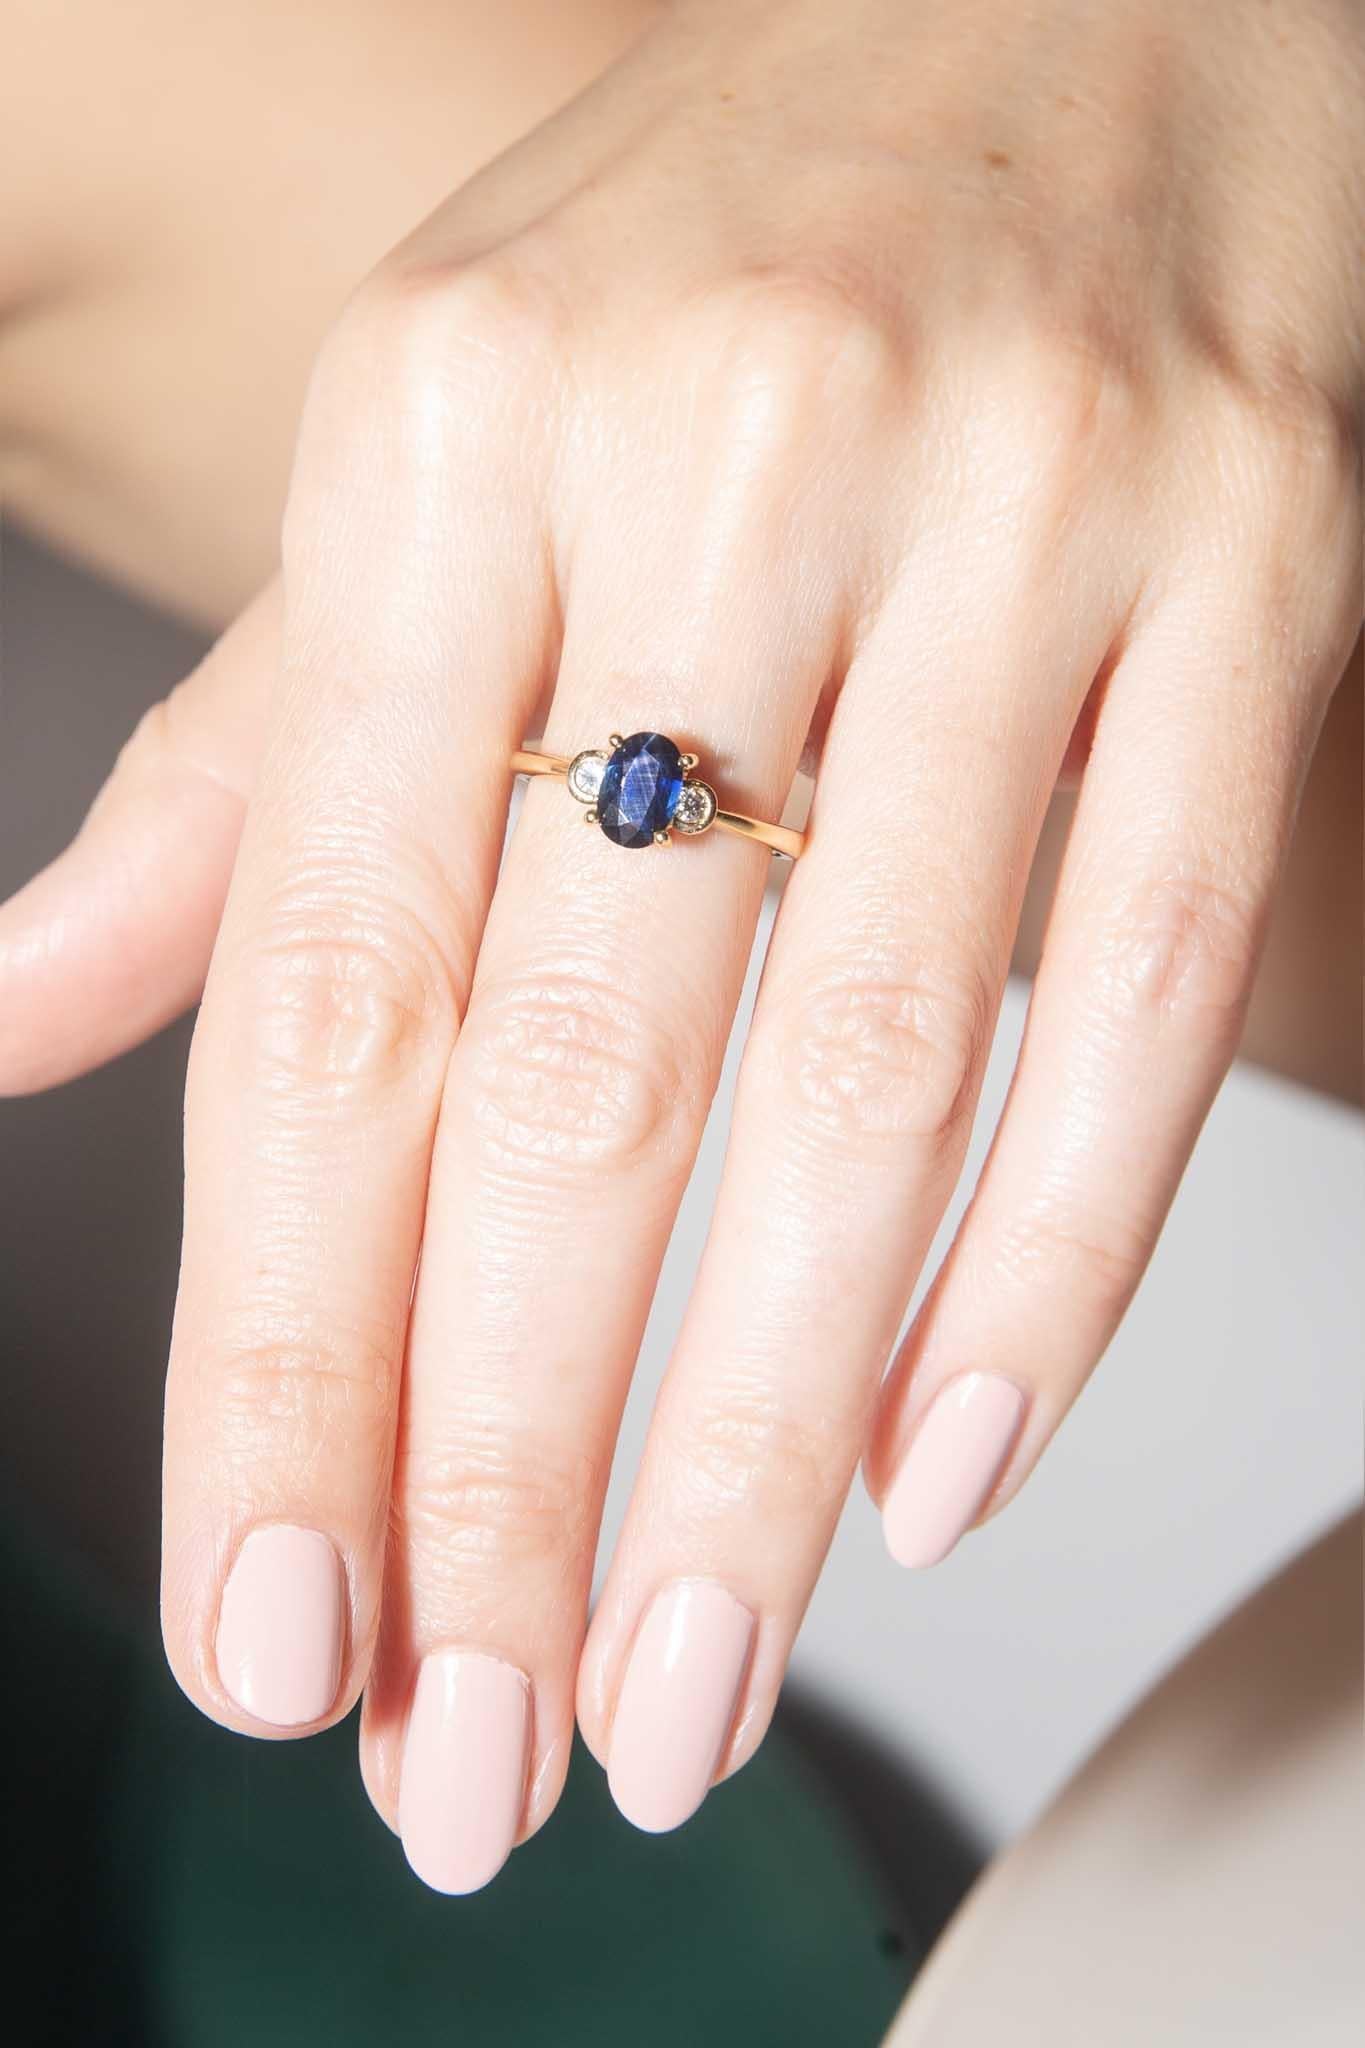 Crafted in 9 carat gold, The Robyn Ring is a classic design with her deep blue sapphire enhanced by a sparkling diamond on either side. A lovely gift for your someone special.

The Robyn Ring Gem Details
The faceted oval deep blue oval sapphire is